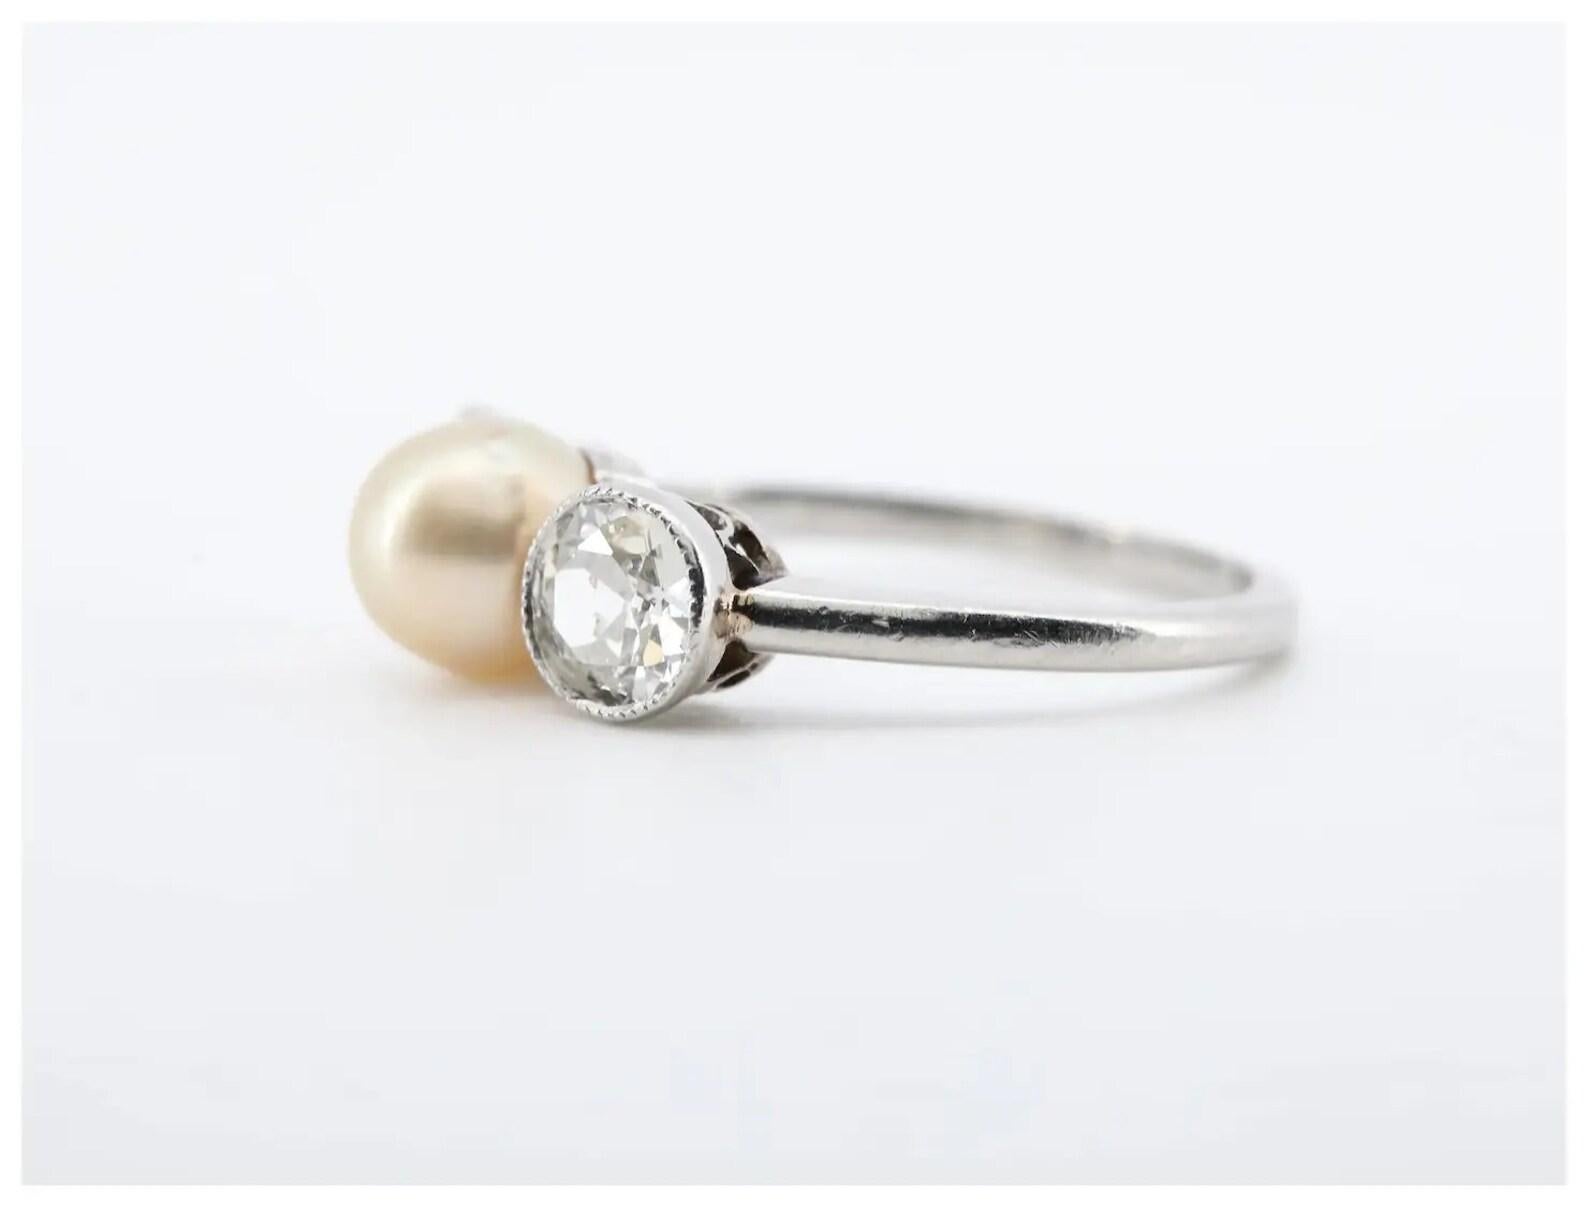 An Edwardian period natural pearl, and old European cut diamond ring crafted of platinum.

Centered by a 6mm diameter natural saltwater pearl of beautiful iridescent golden color.

Framed by twin bezel set old European cut diamonds of 0.80ctw with G